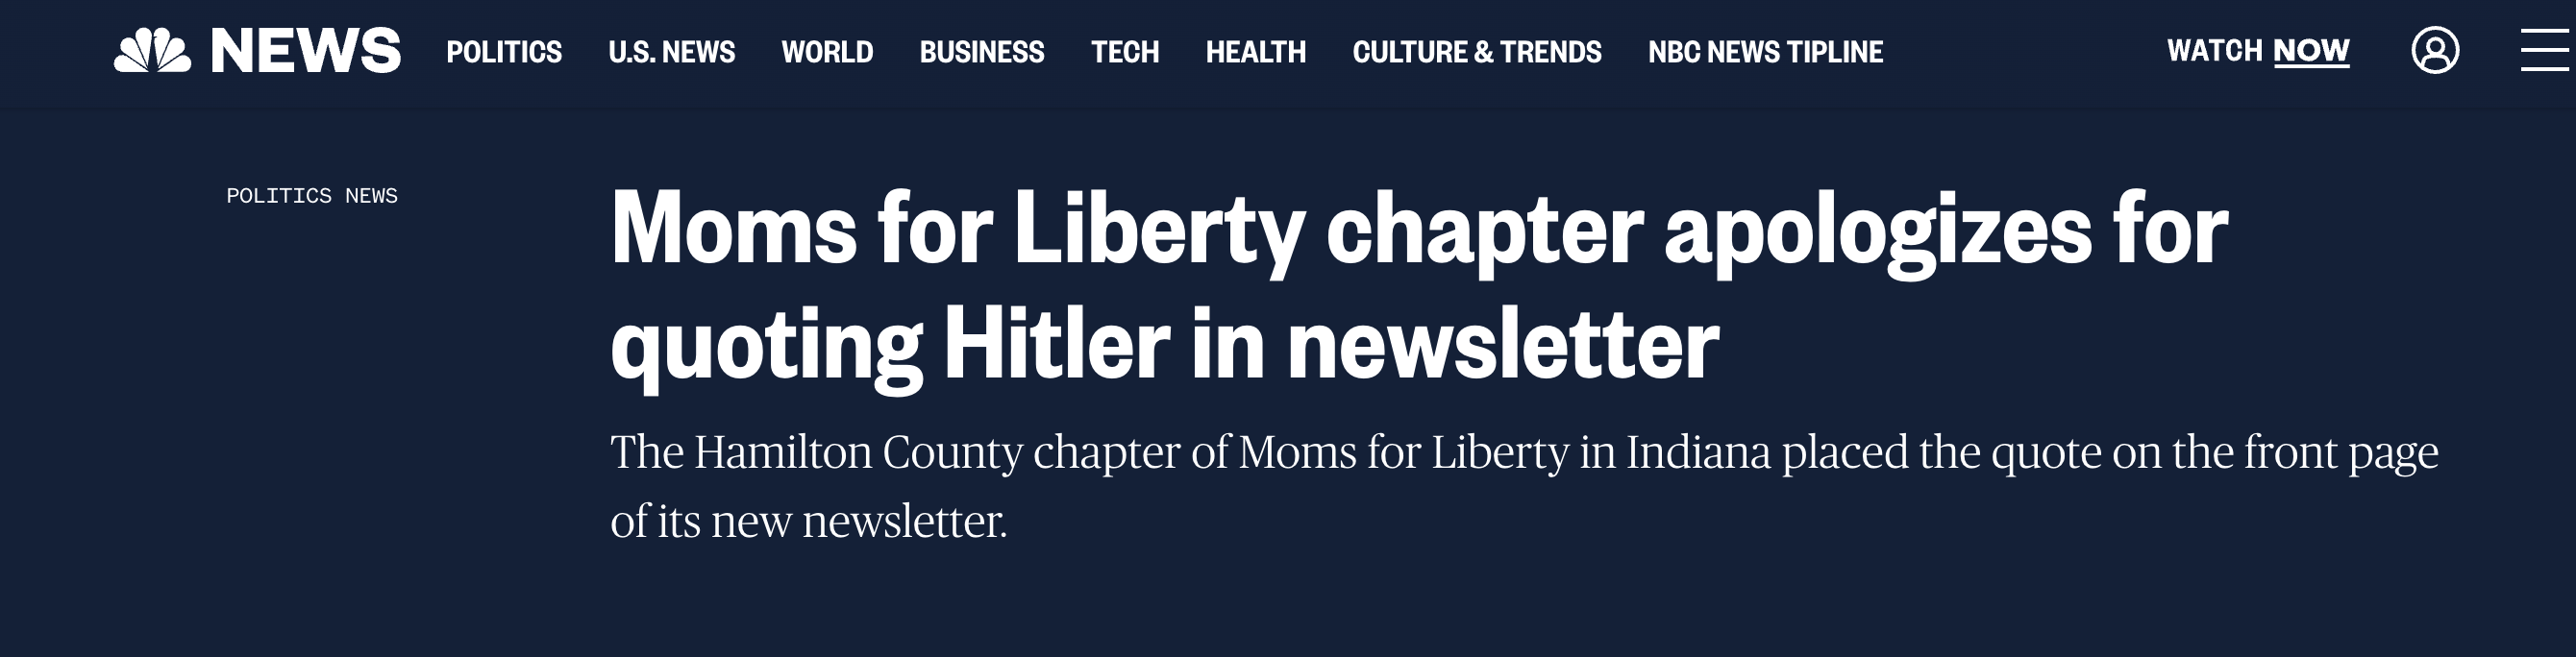 angle - News Politics Politics News U.S. News World Business Tech Health Culture & Trends Nbc News Tipline Watch Now Moms for Liberty chapter apologizes for quoting Hitler in newsletter 8 The Hamilton County chapter of Moms for Liberty in Indiana placed t